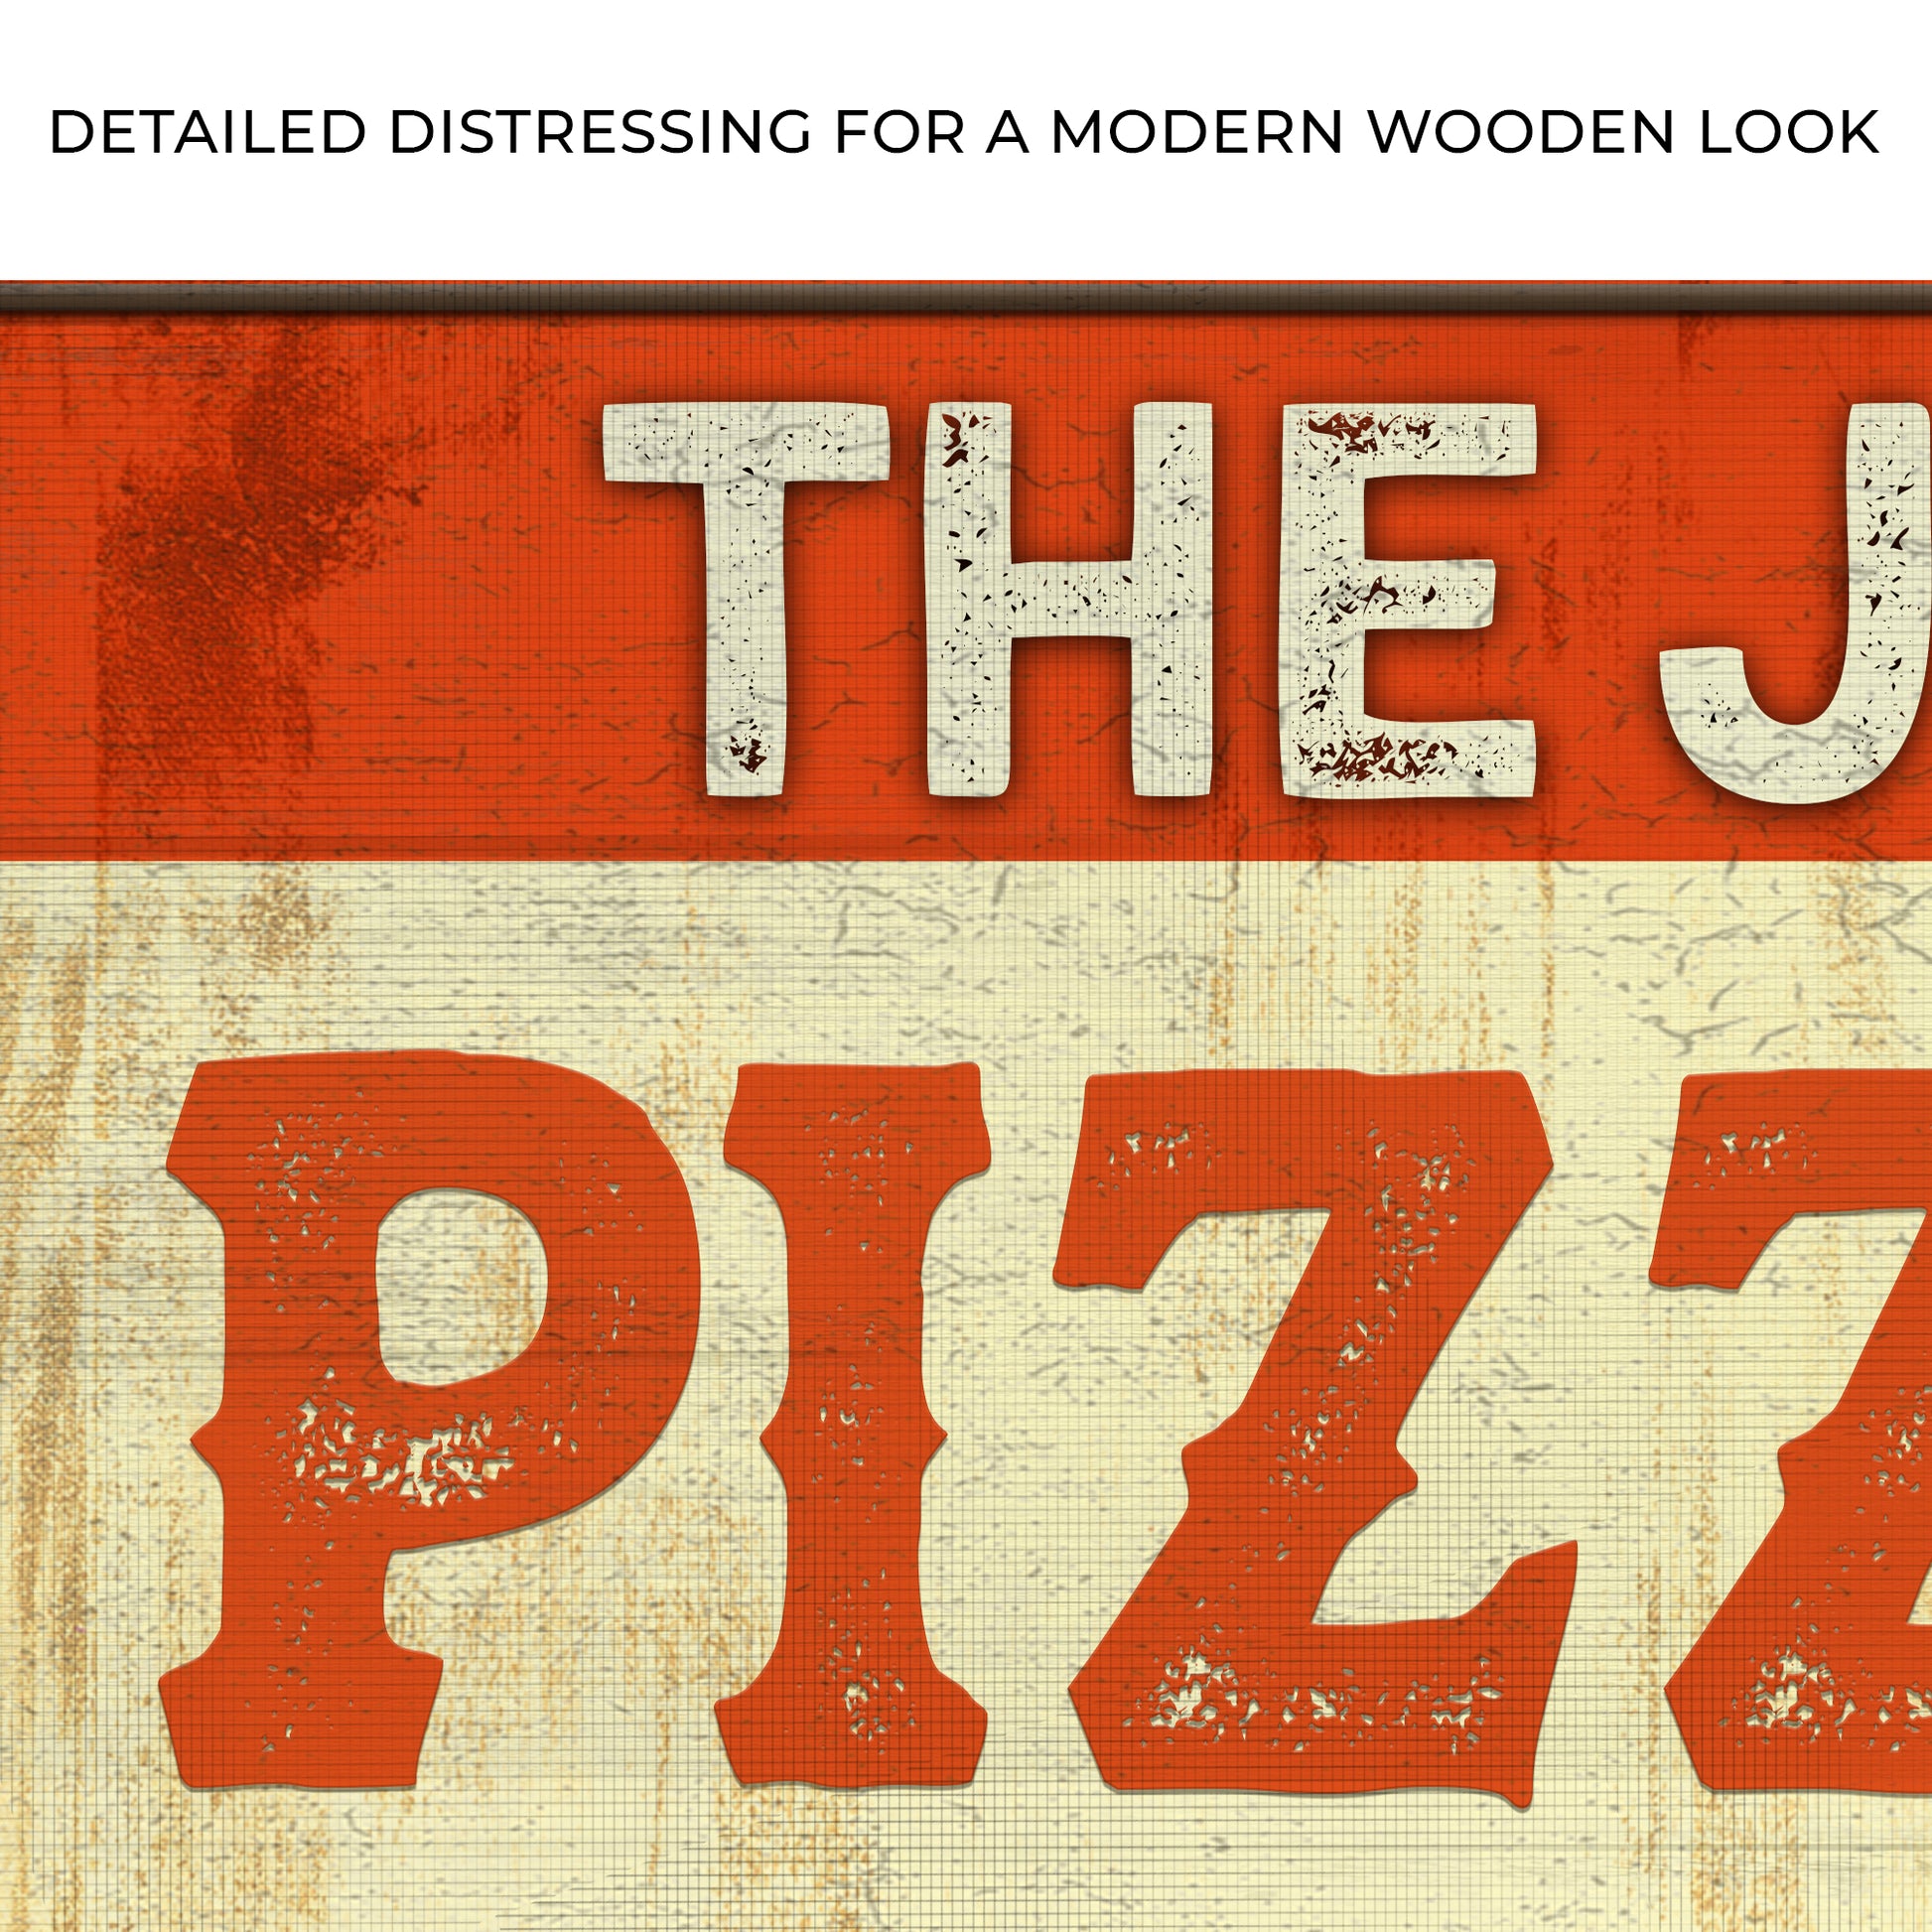 Vintage Pizzeria Sign | Customizable Canvas Zoom - Image by Tailored Canvases